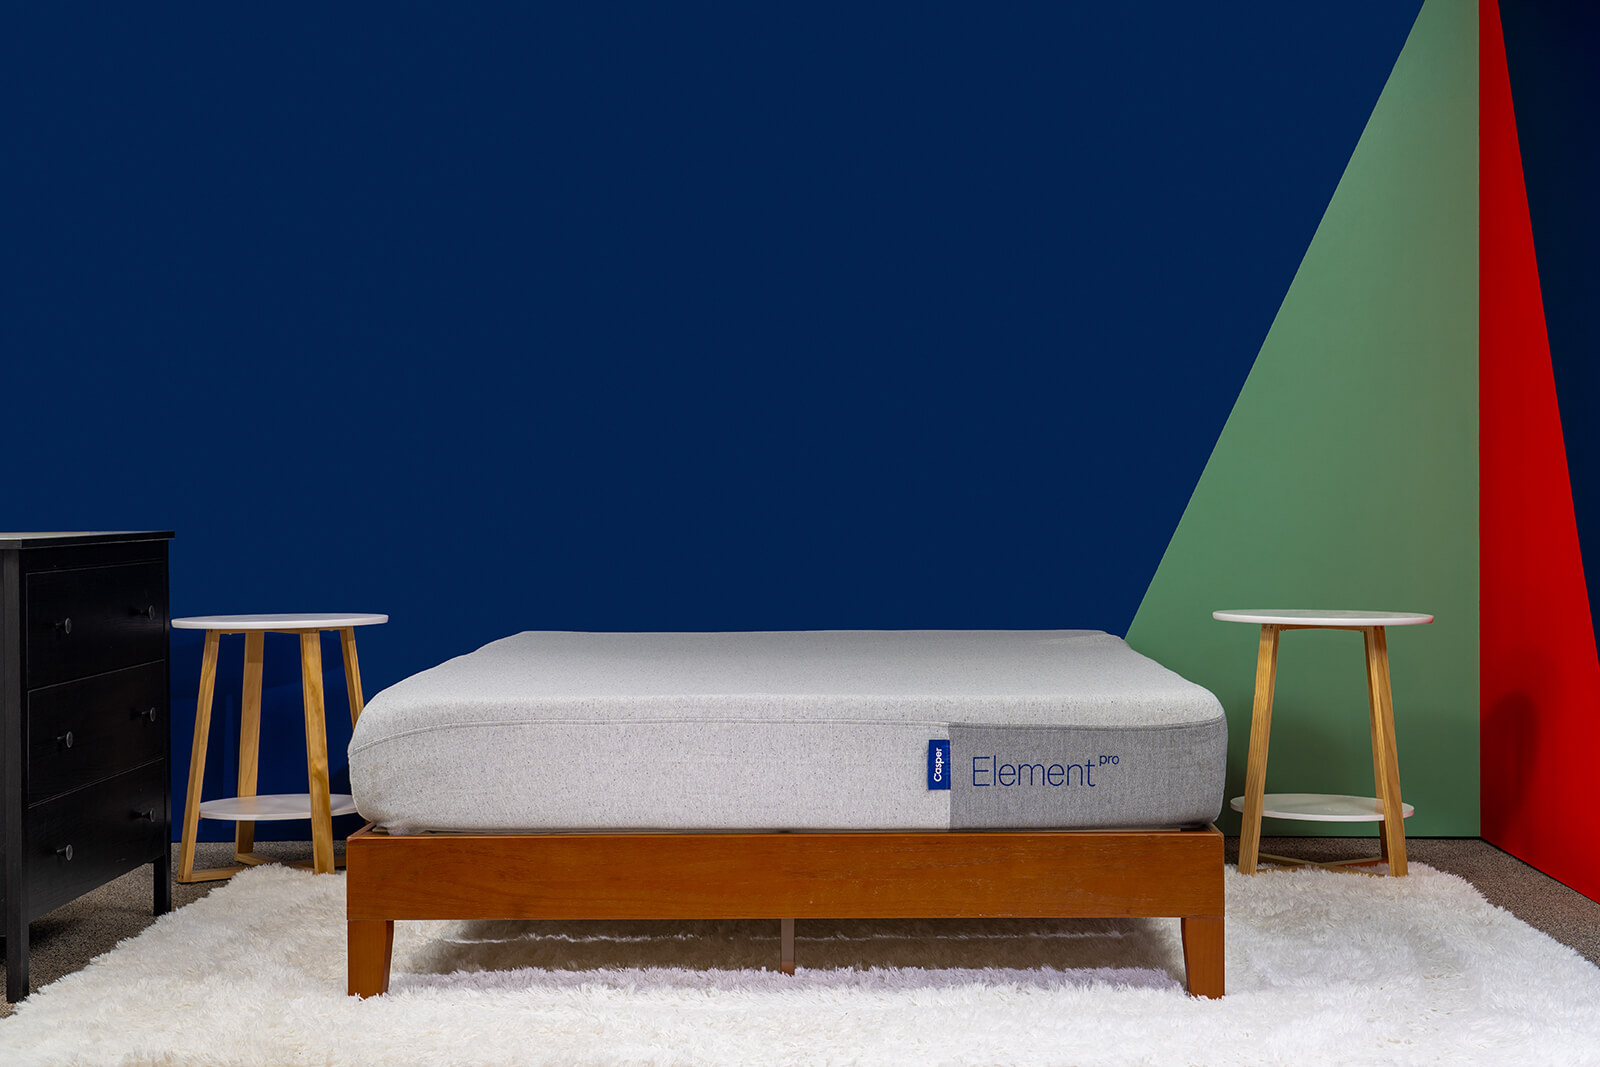 Distant photo of the Casper Element Pro Mattress on a bedframe in a bedroom taken from a front angle.